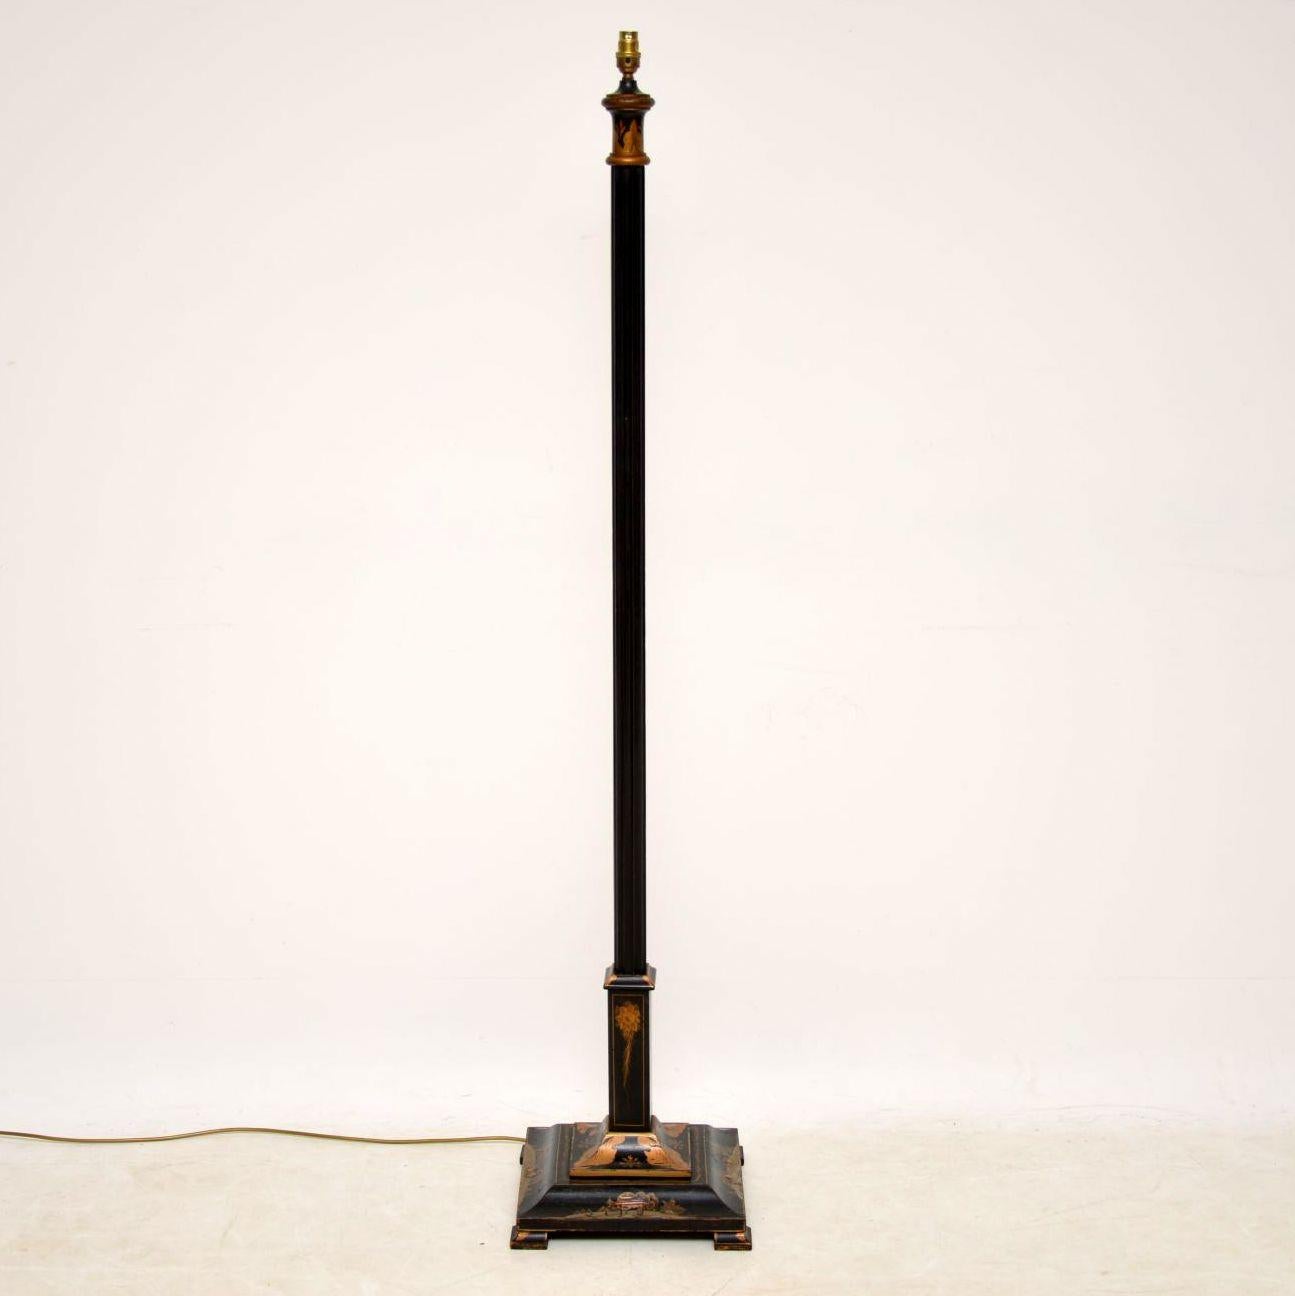 Antique lacquered chinoiserie lamp stand in good original condition dating from circa the 1910-1920s period. These chinoiserie items were very popular around that period and were a revival of the fashion that originally dated to the Queen Anne